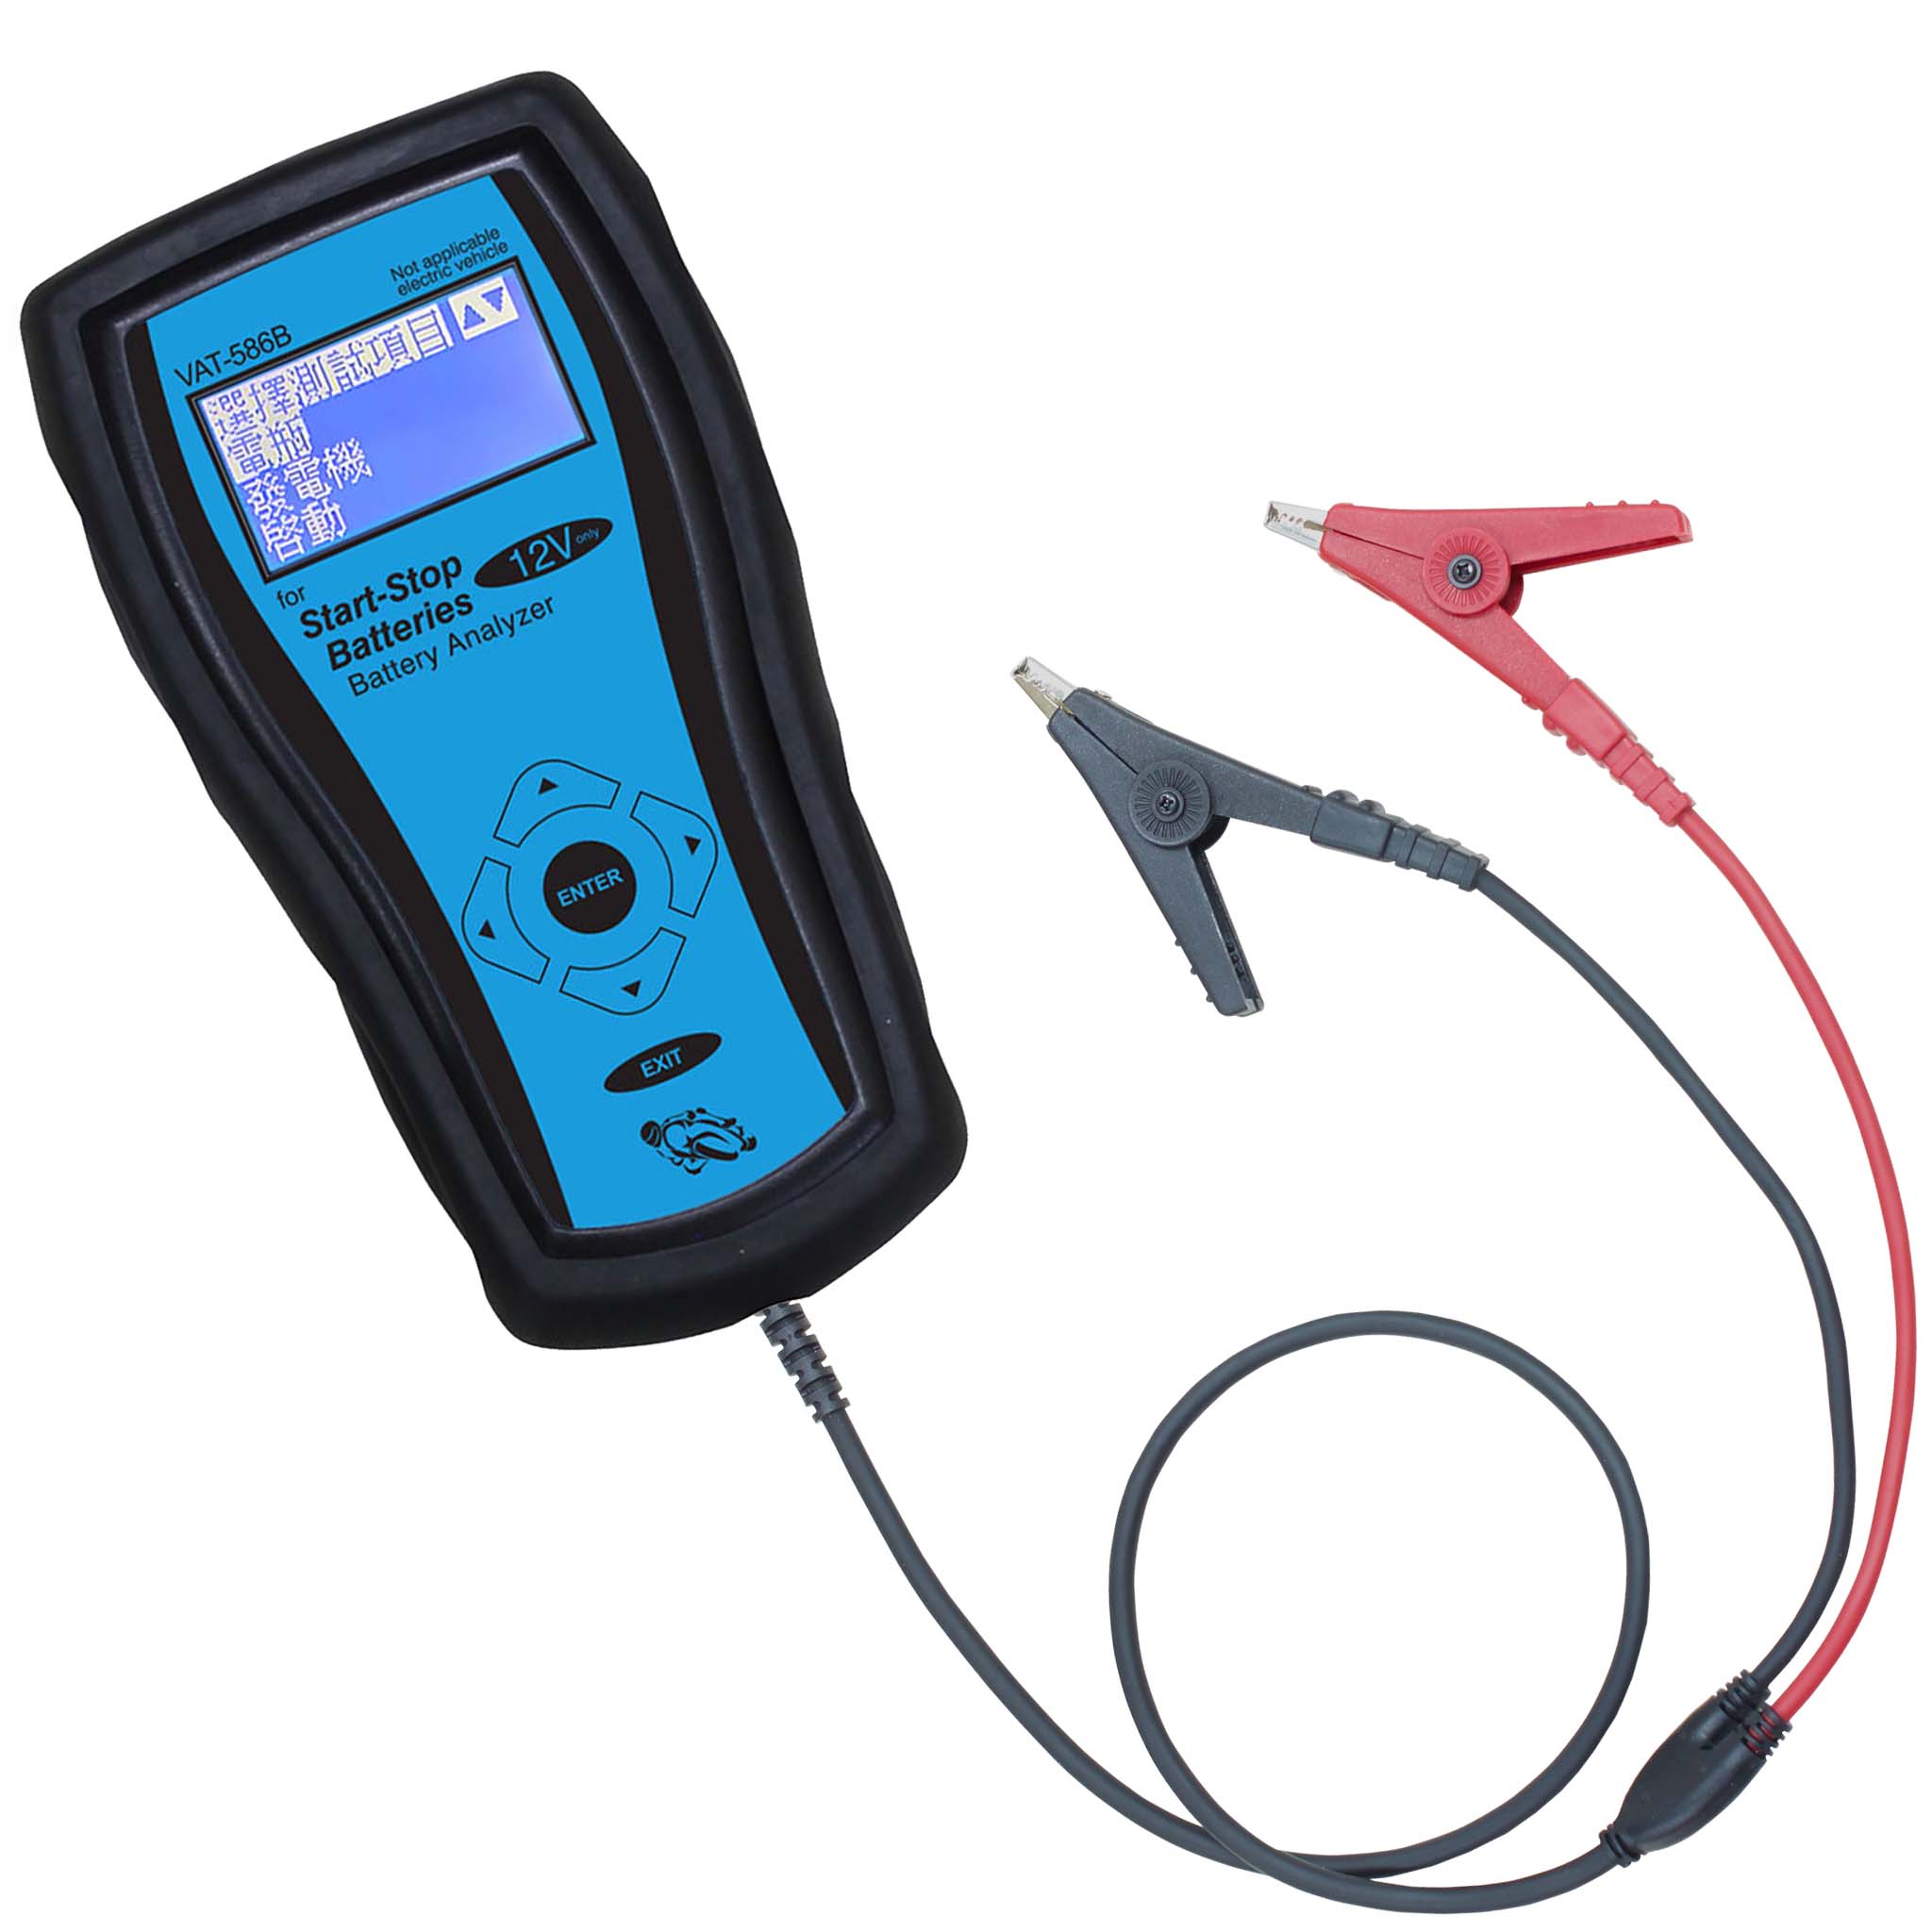 Bicycle / Motorcycle Battery Analyzer for Testing Equipment of  Vehicle  made by ECPAL VEHICLE CO., LTD.　威爾可有限公司 - MatchSupplier.com